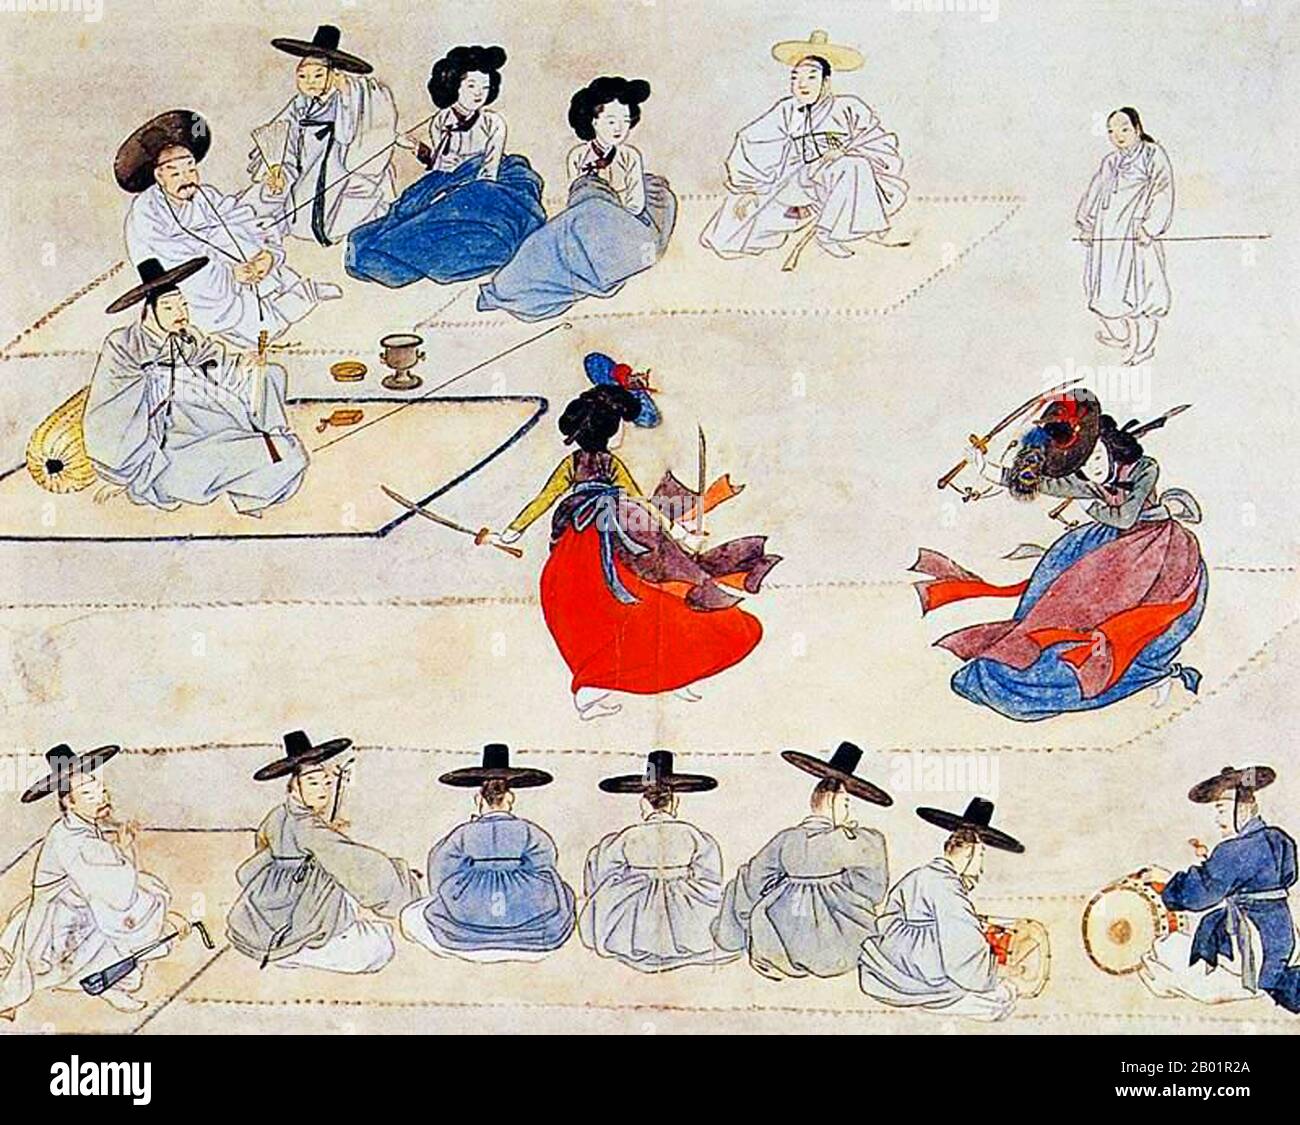 Korea: Two women dancing with swords. Painting from the 'Hyewon Pungsokdo', c. 1805.  'Hyewon Pungsokdo' is an album of genre paintings by Shin Yunbok or Hyewon (1758-1813), one of the most famous genre painters of the late Joseon period (1390-1910). This album is designated as the 135th National Treasure of South Korea and held by Gansong Art Museum in Seongbuk-gu, Seoul. Stock Photo